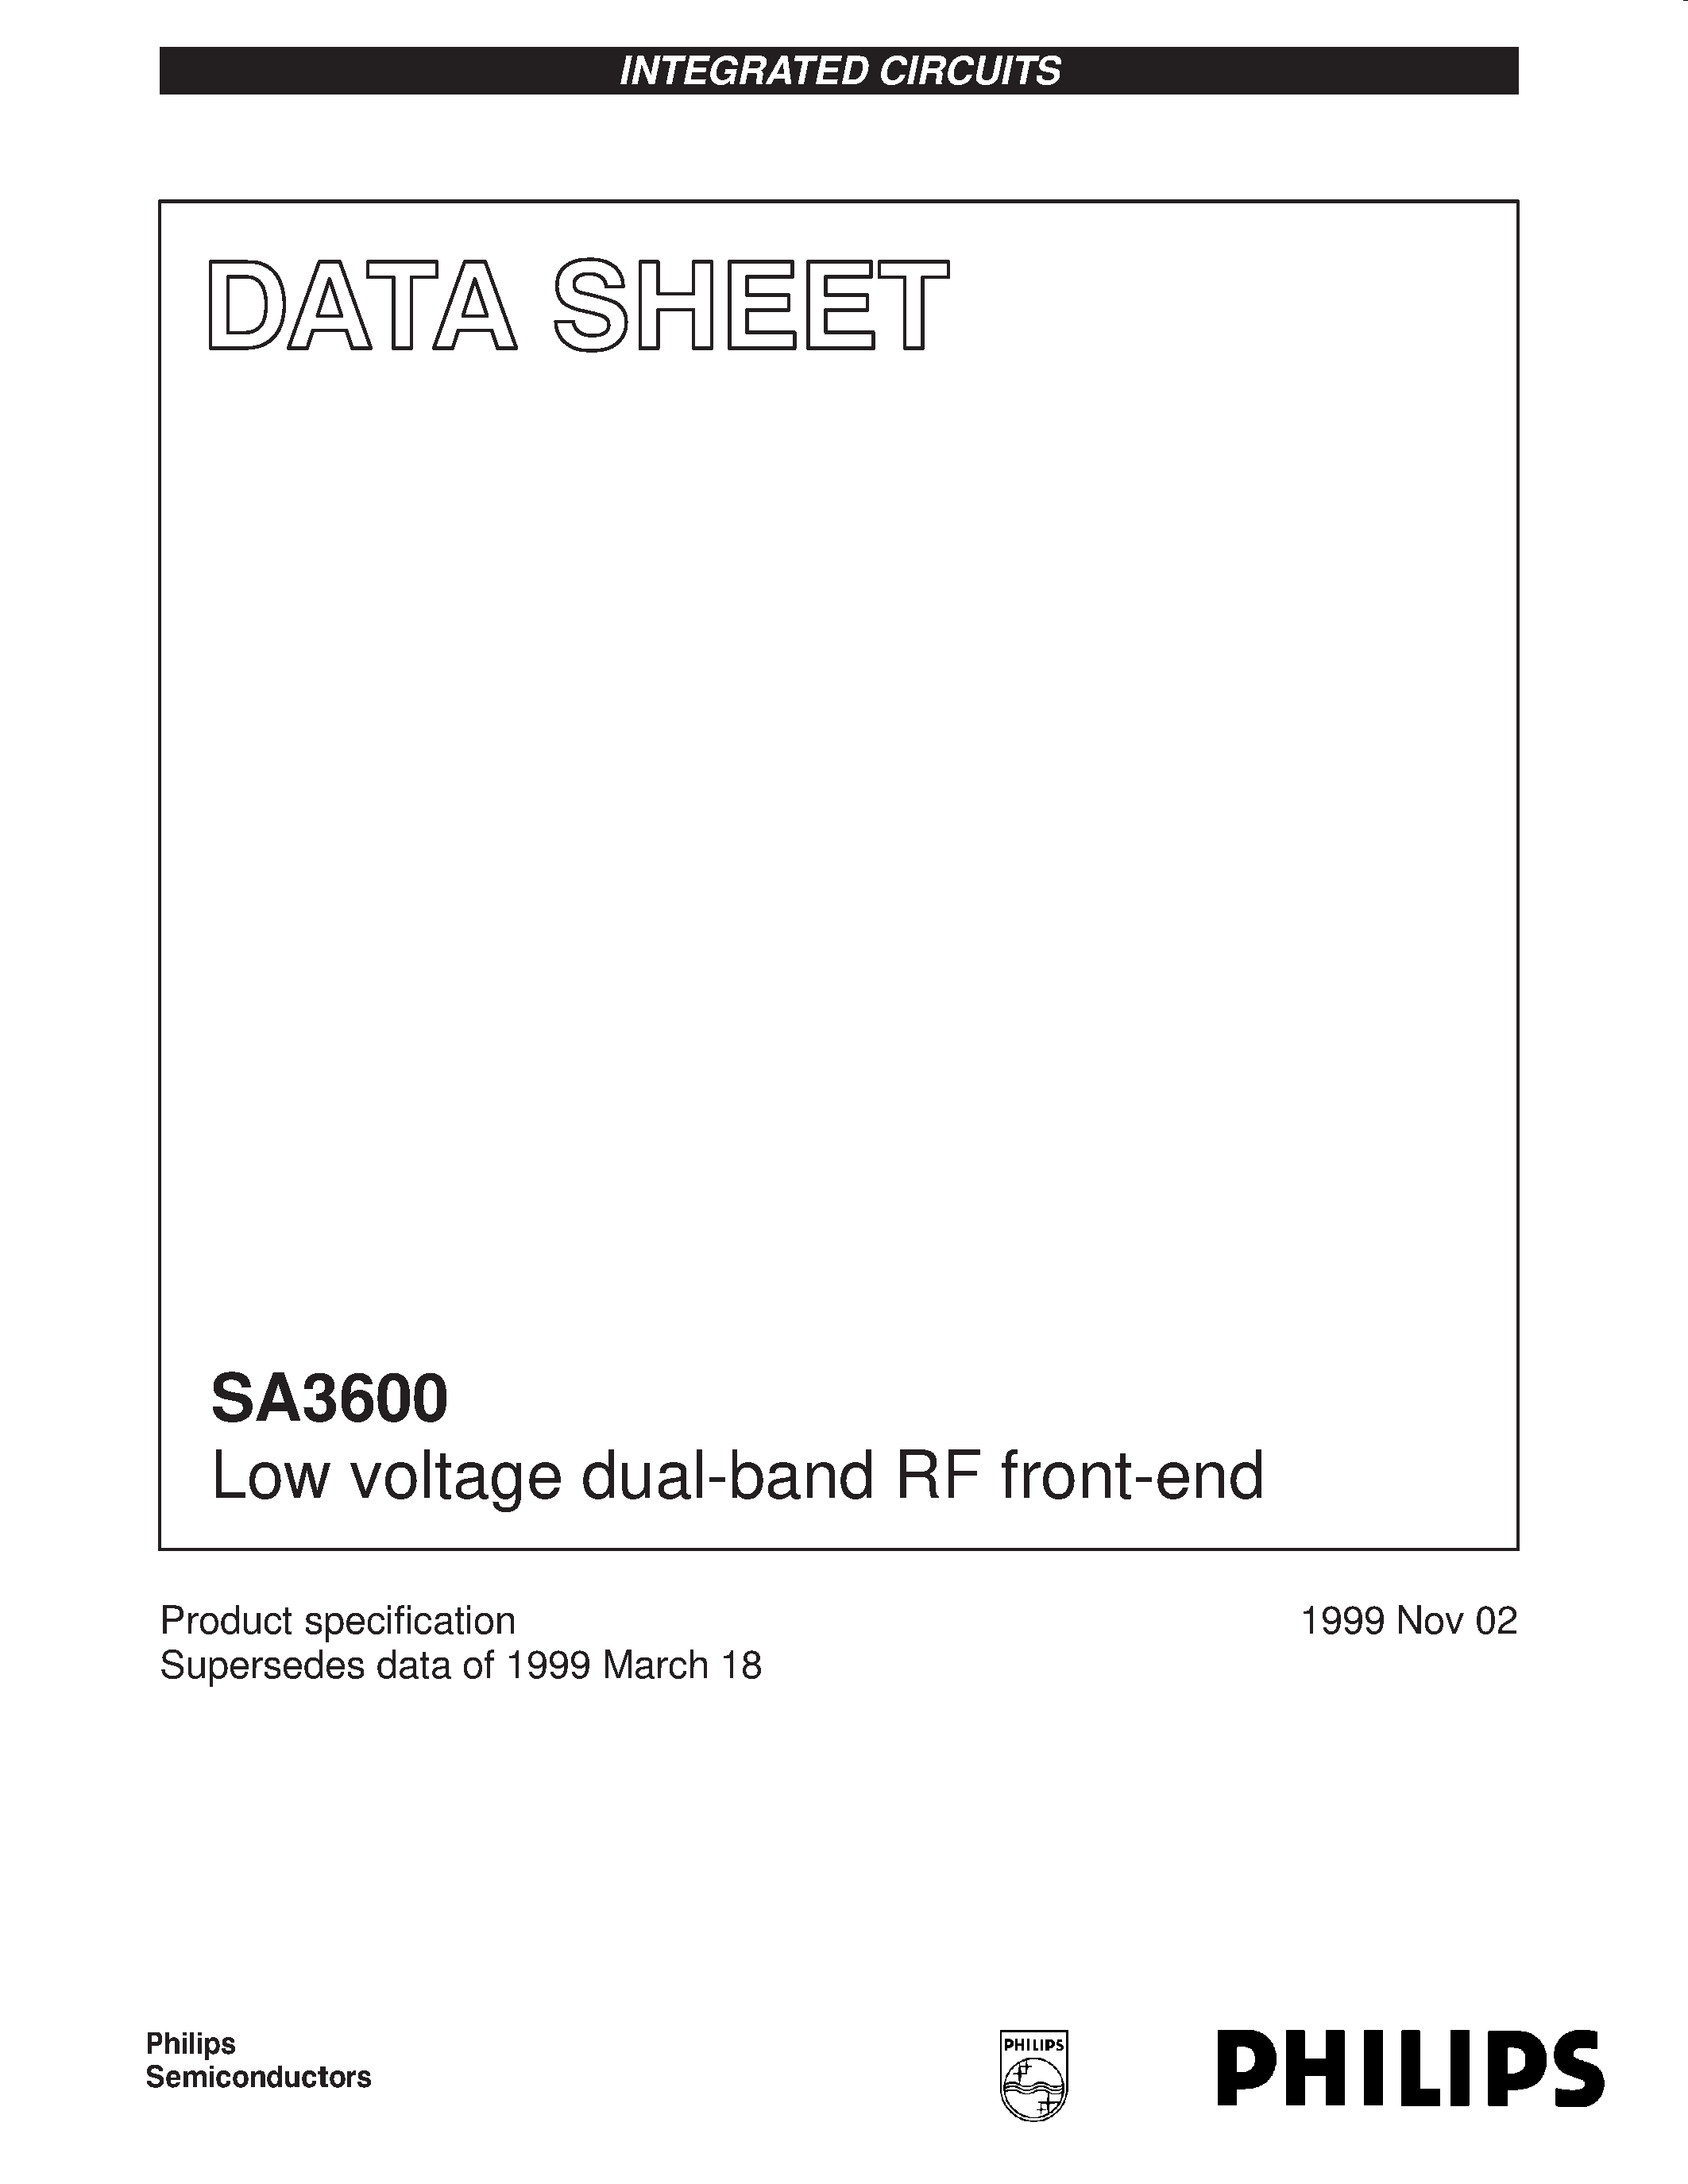 Datasheet SA3600 - Low voltage dual-band RF front-end page 1